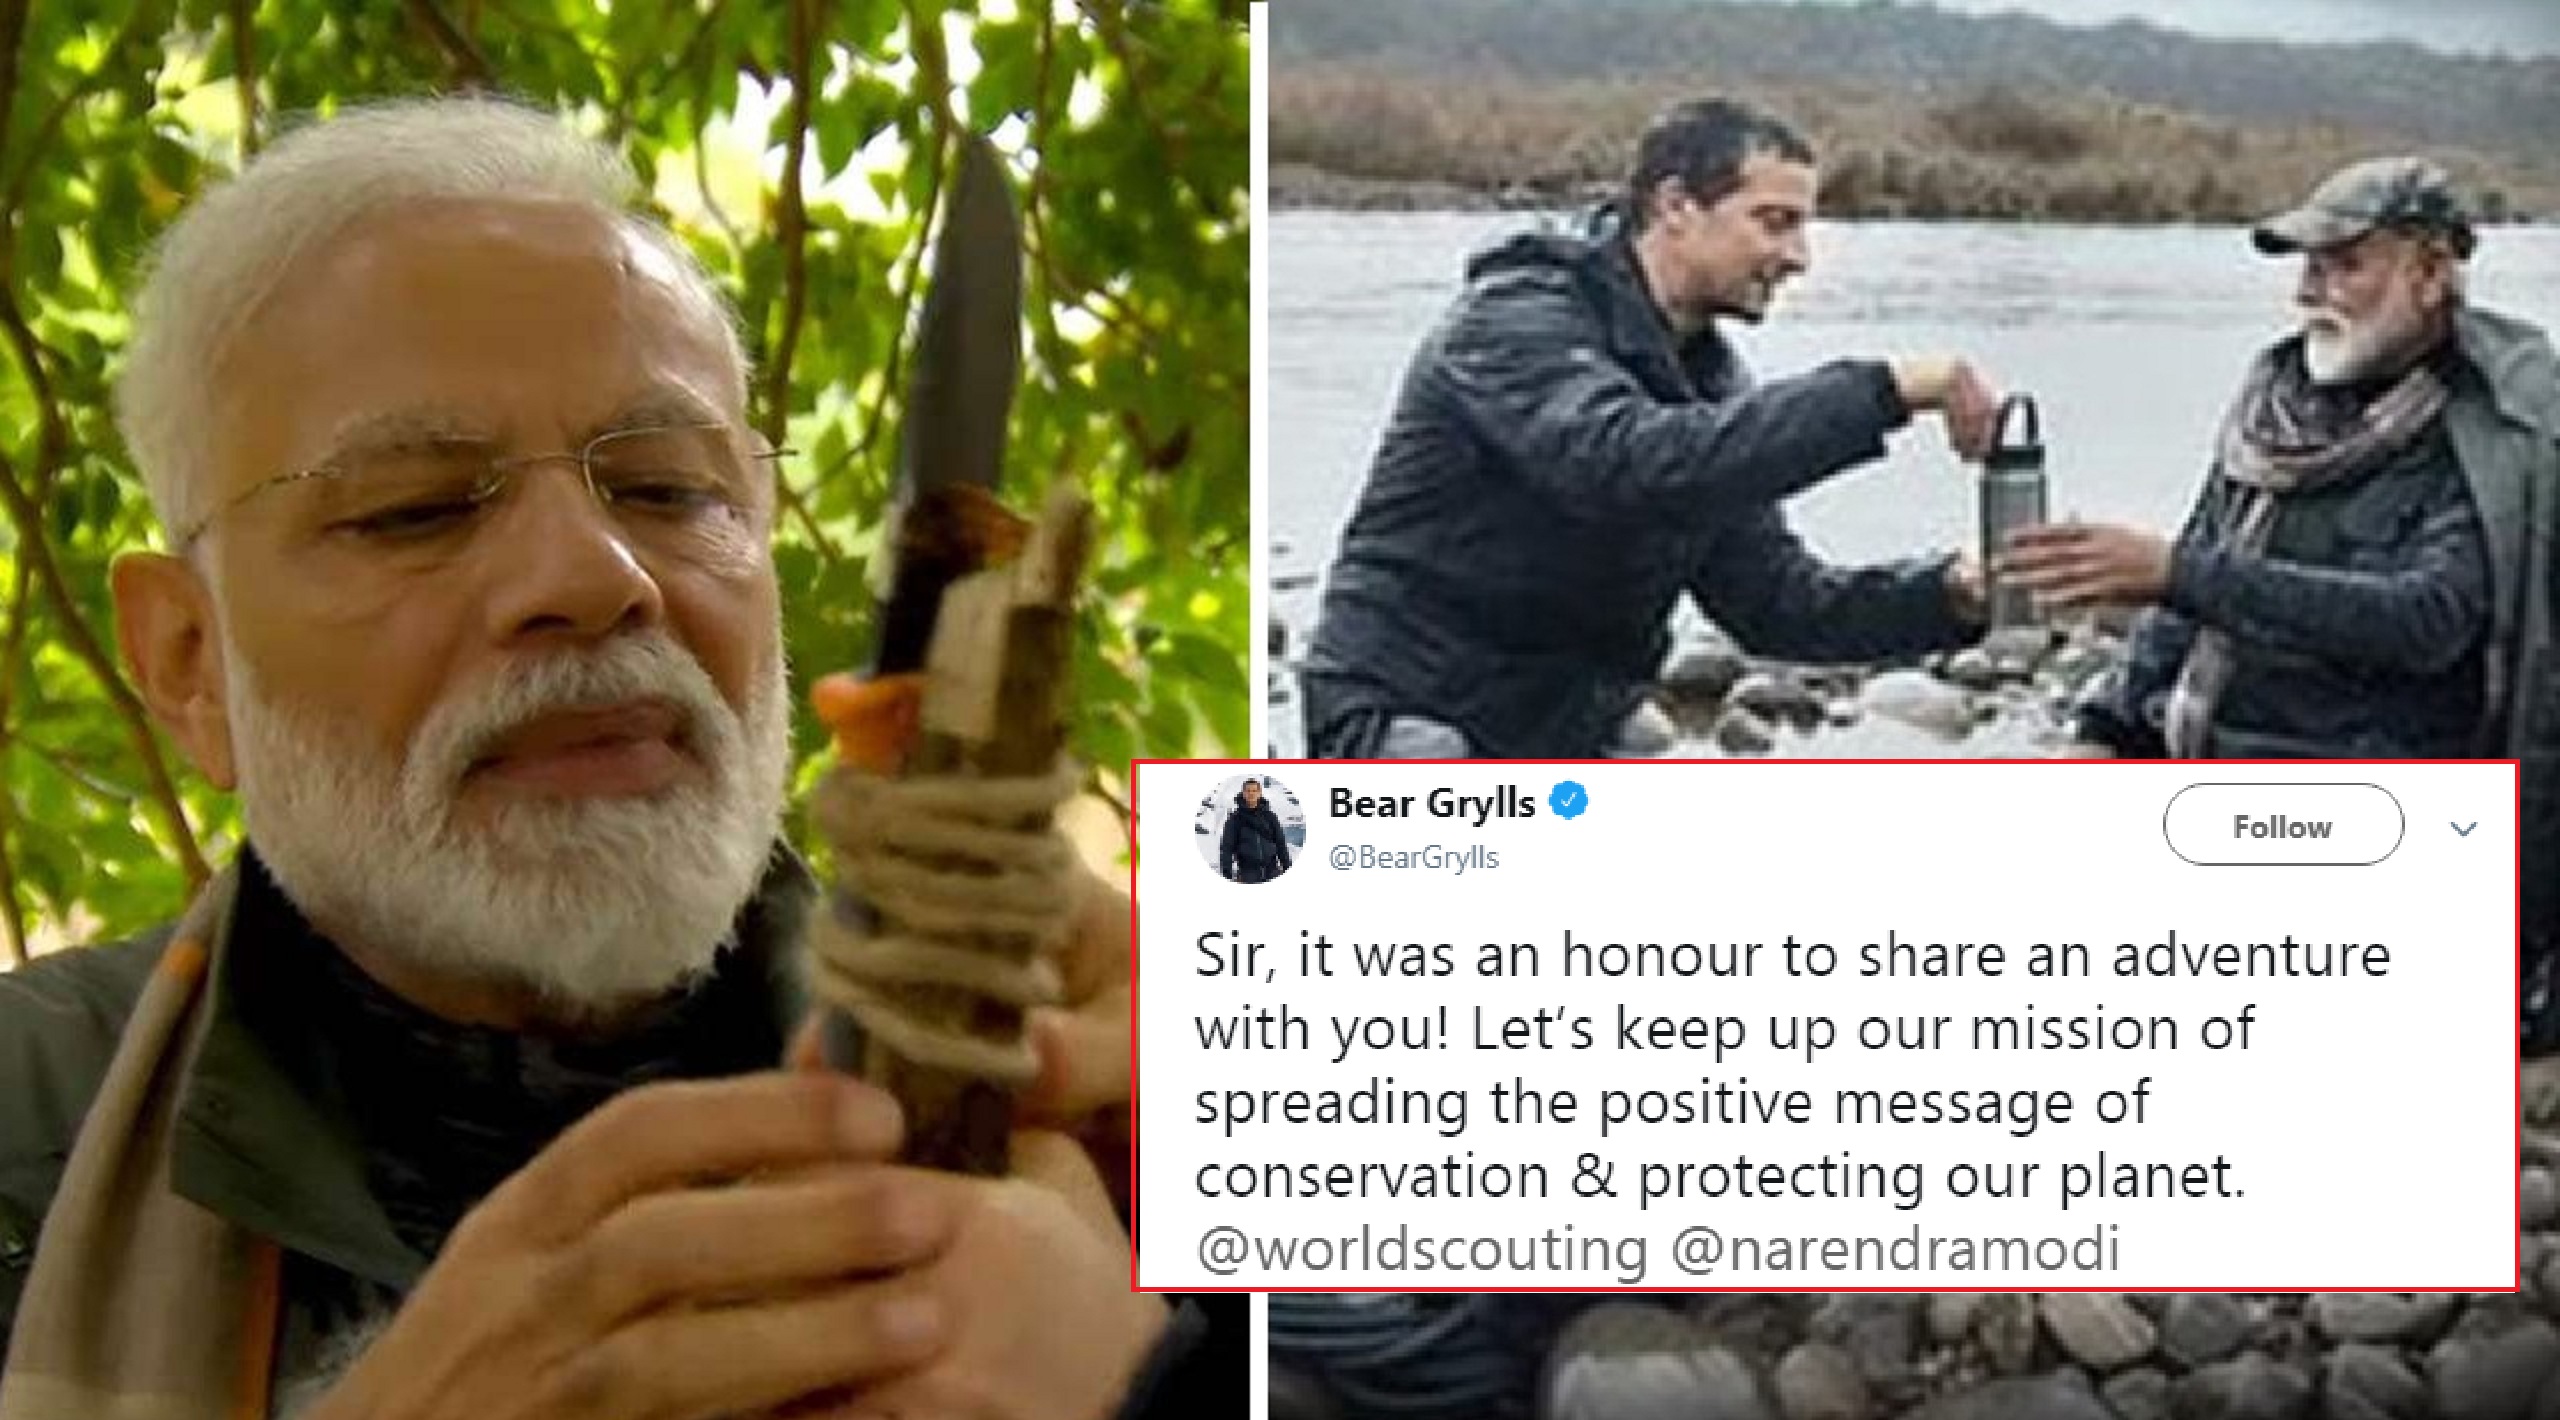 PM Modi To Appear Alongside Bear Grylls In A Special Indian Episode of Man VS Wild